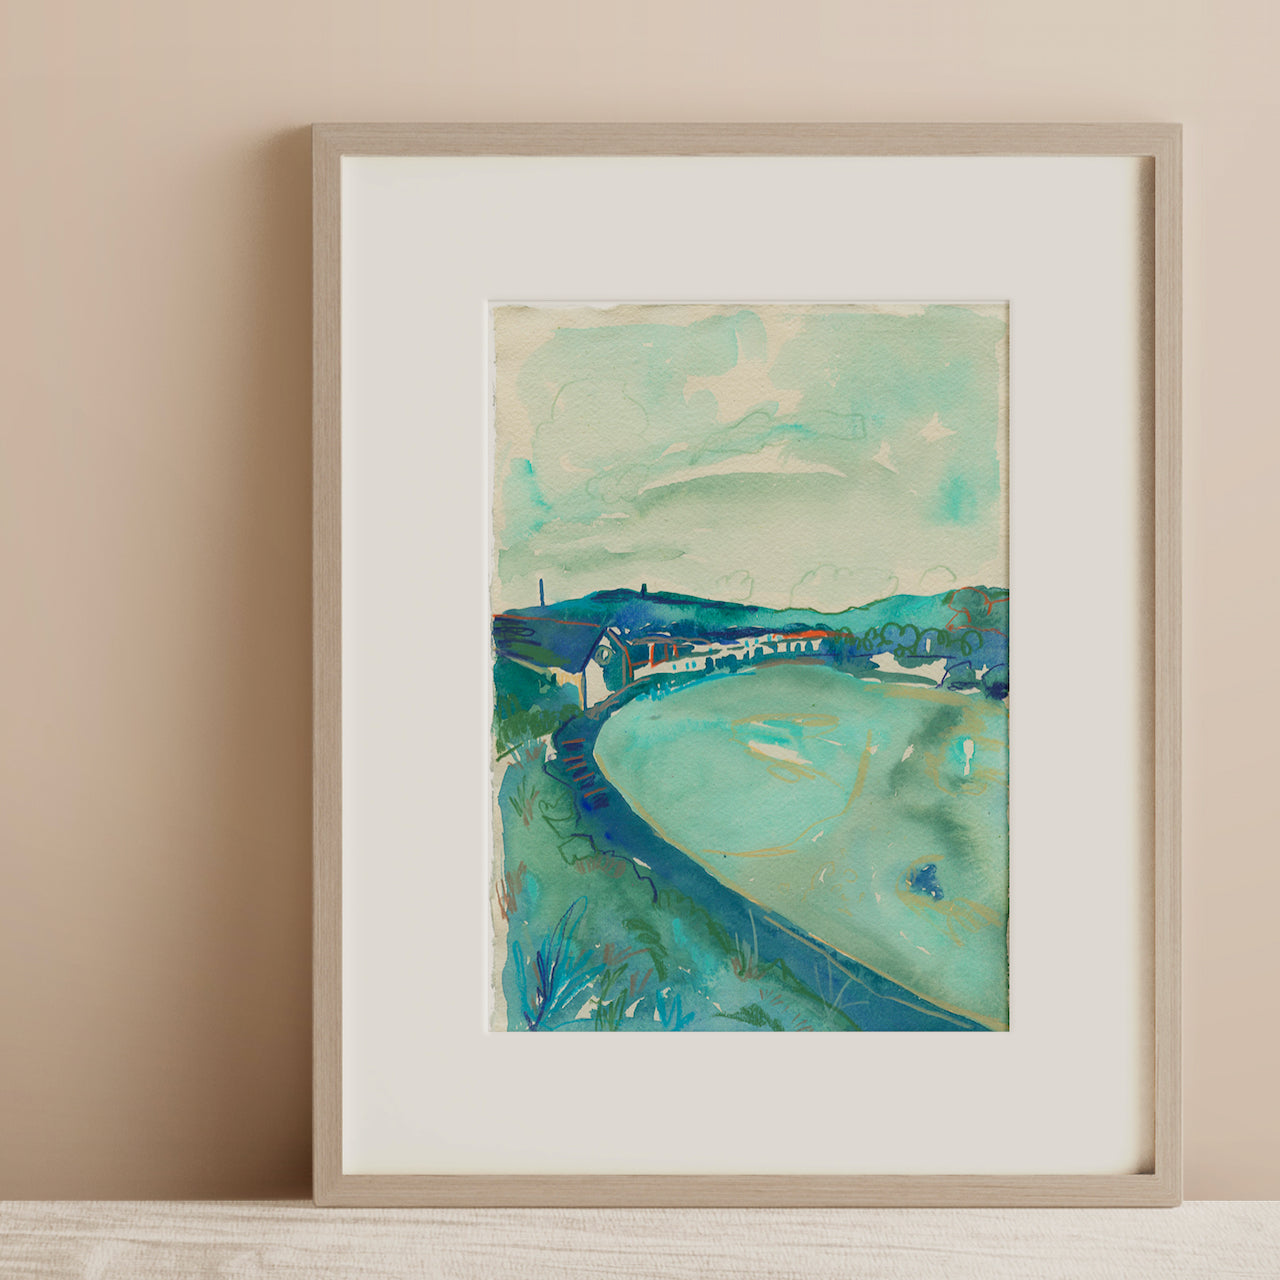 Cornish landscape  in blue and turquoise by artist Lucy Innes Williams